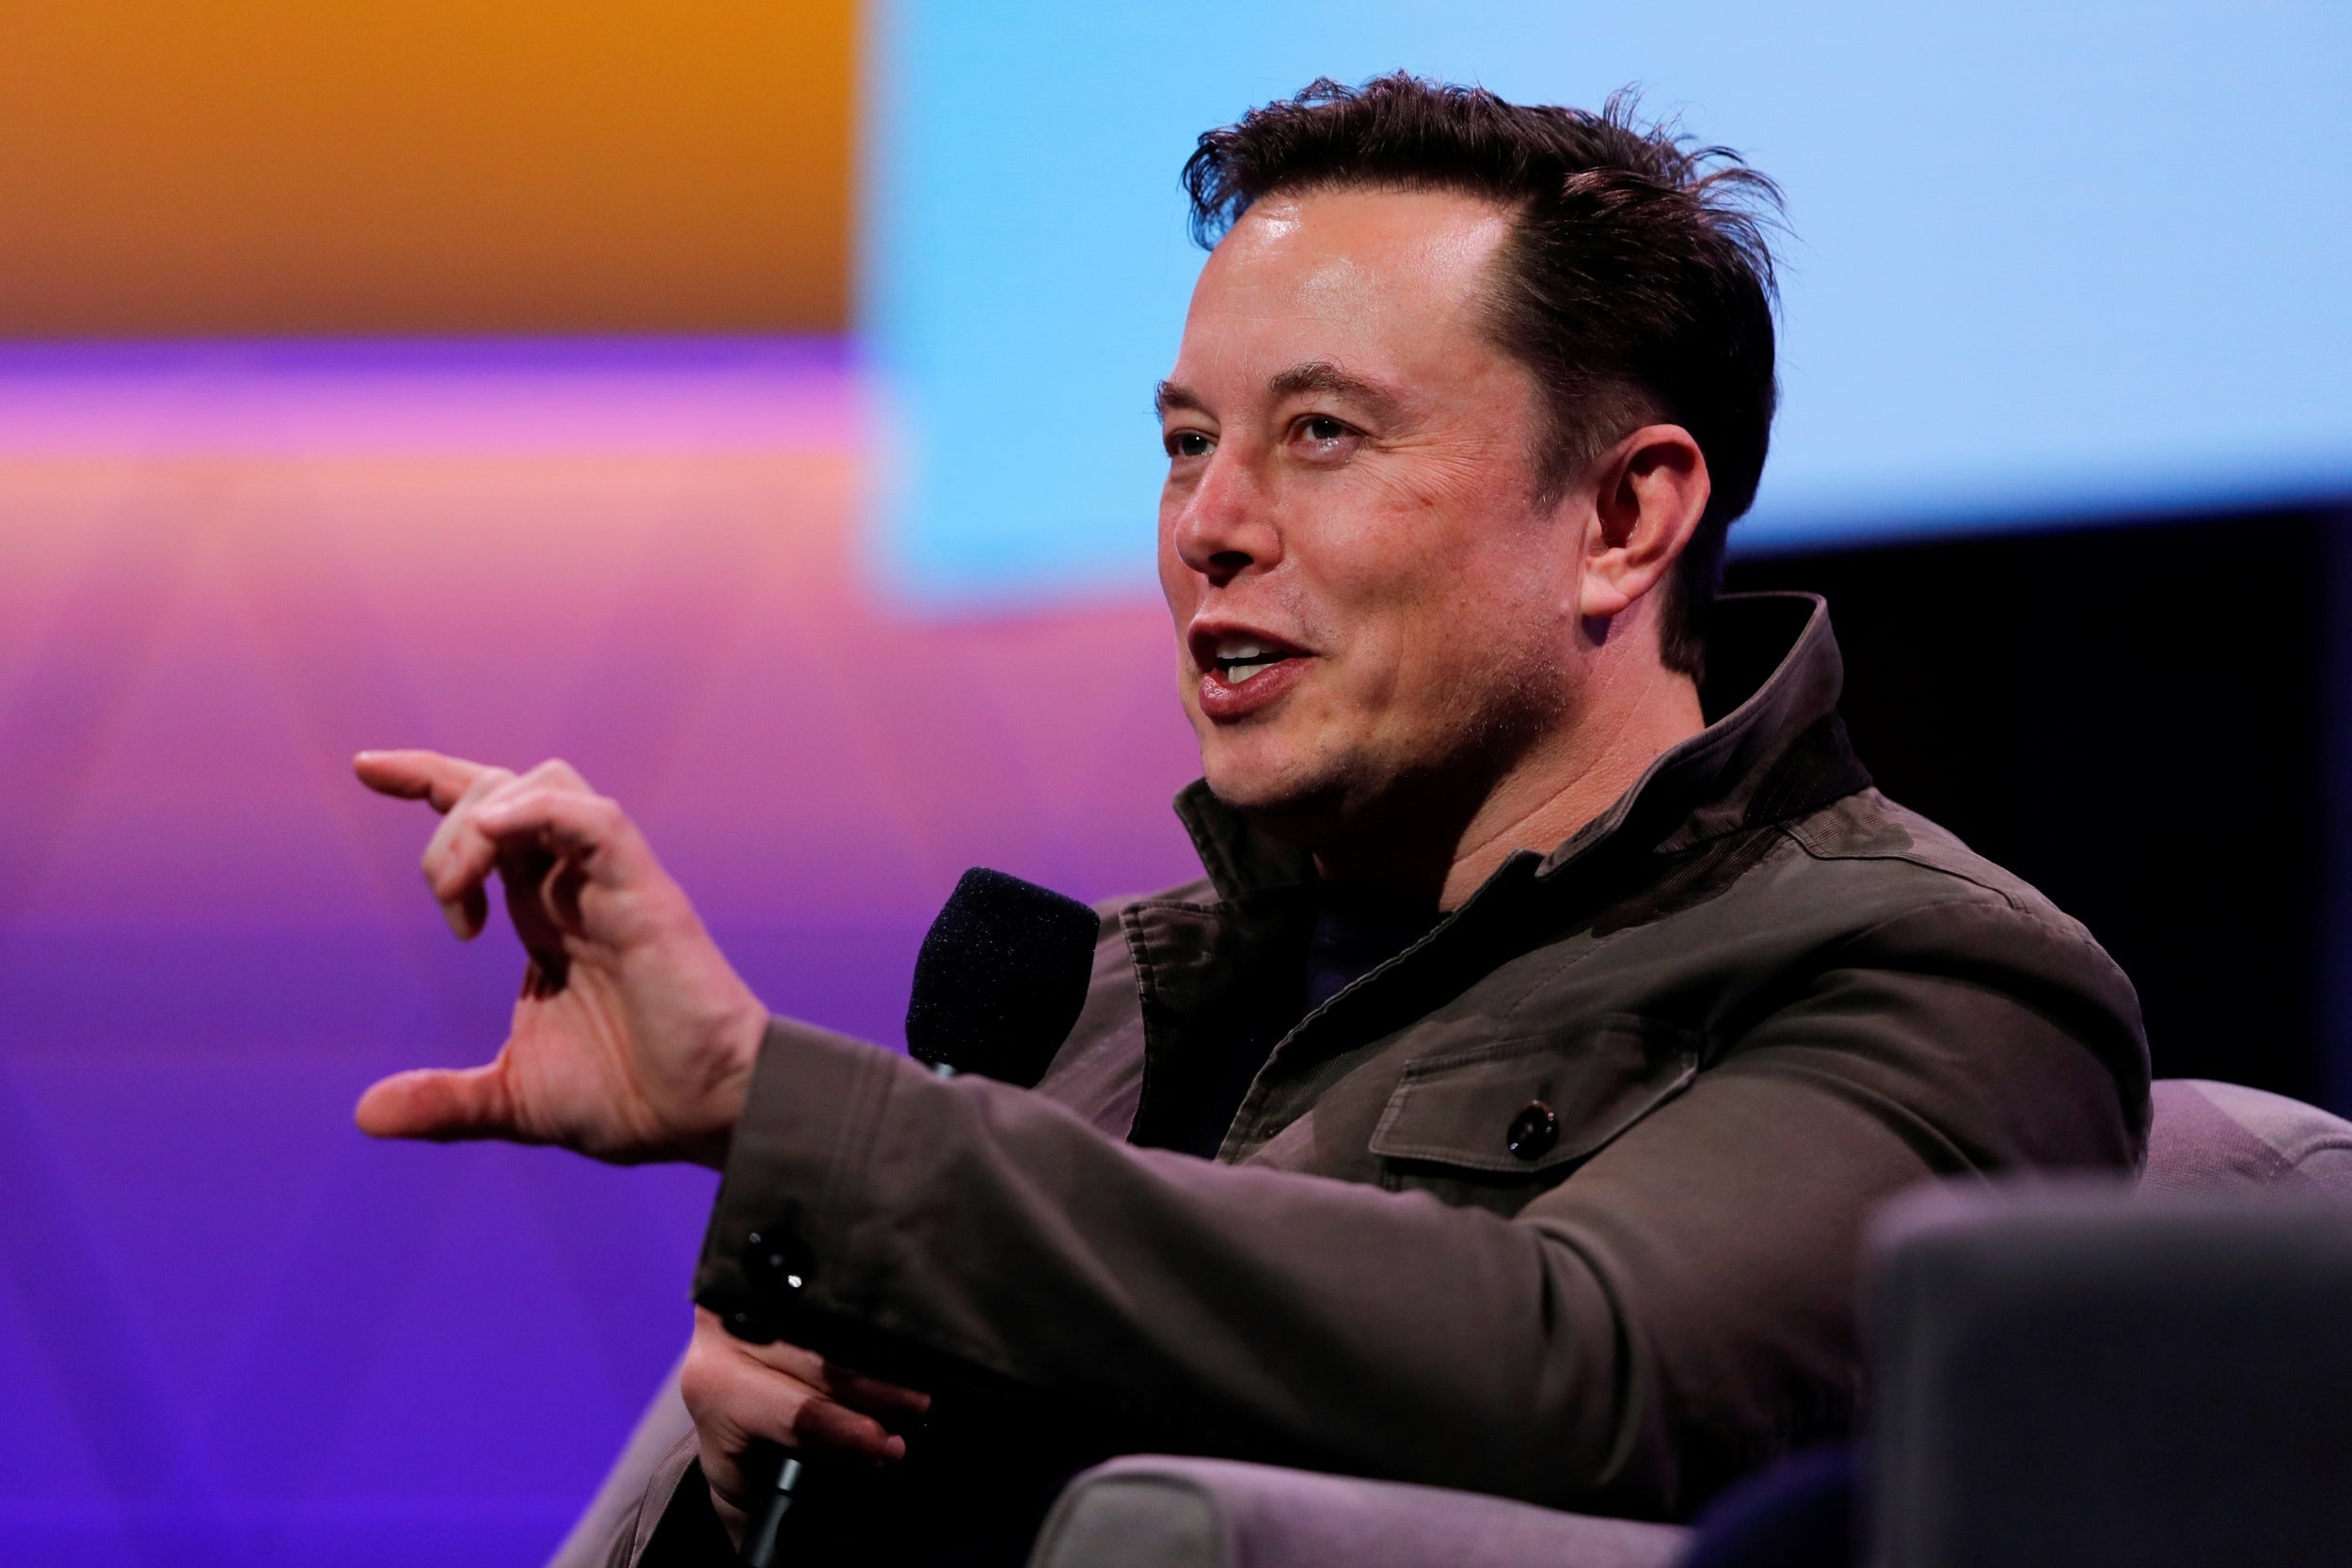 Elon Musk tweets support for Twitter boss amid reports Jack Dorsey could be deposed